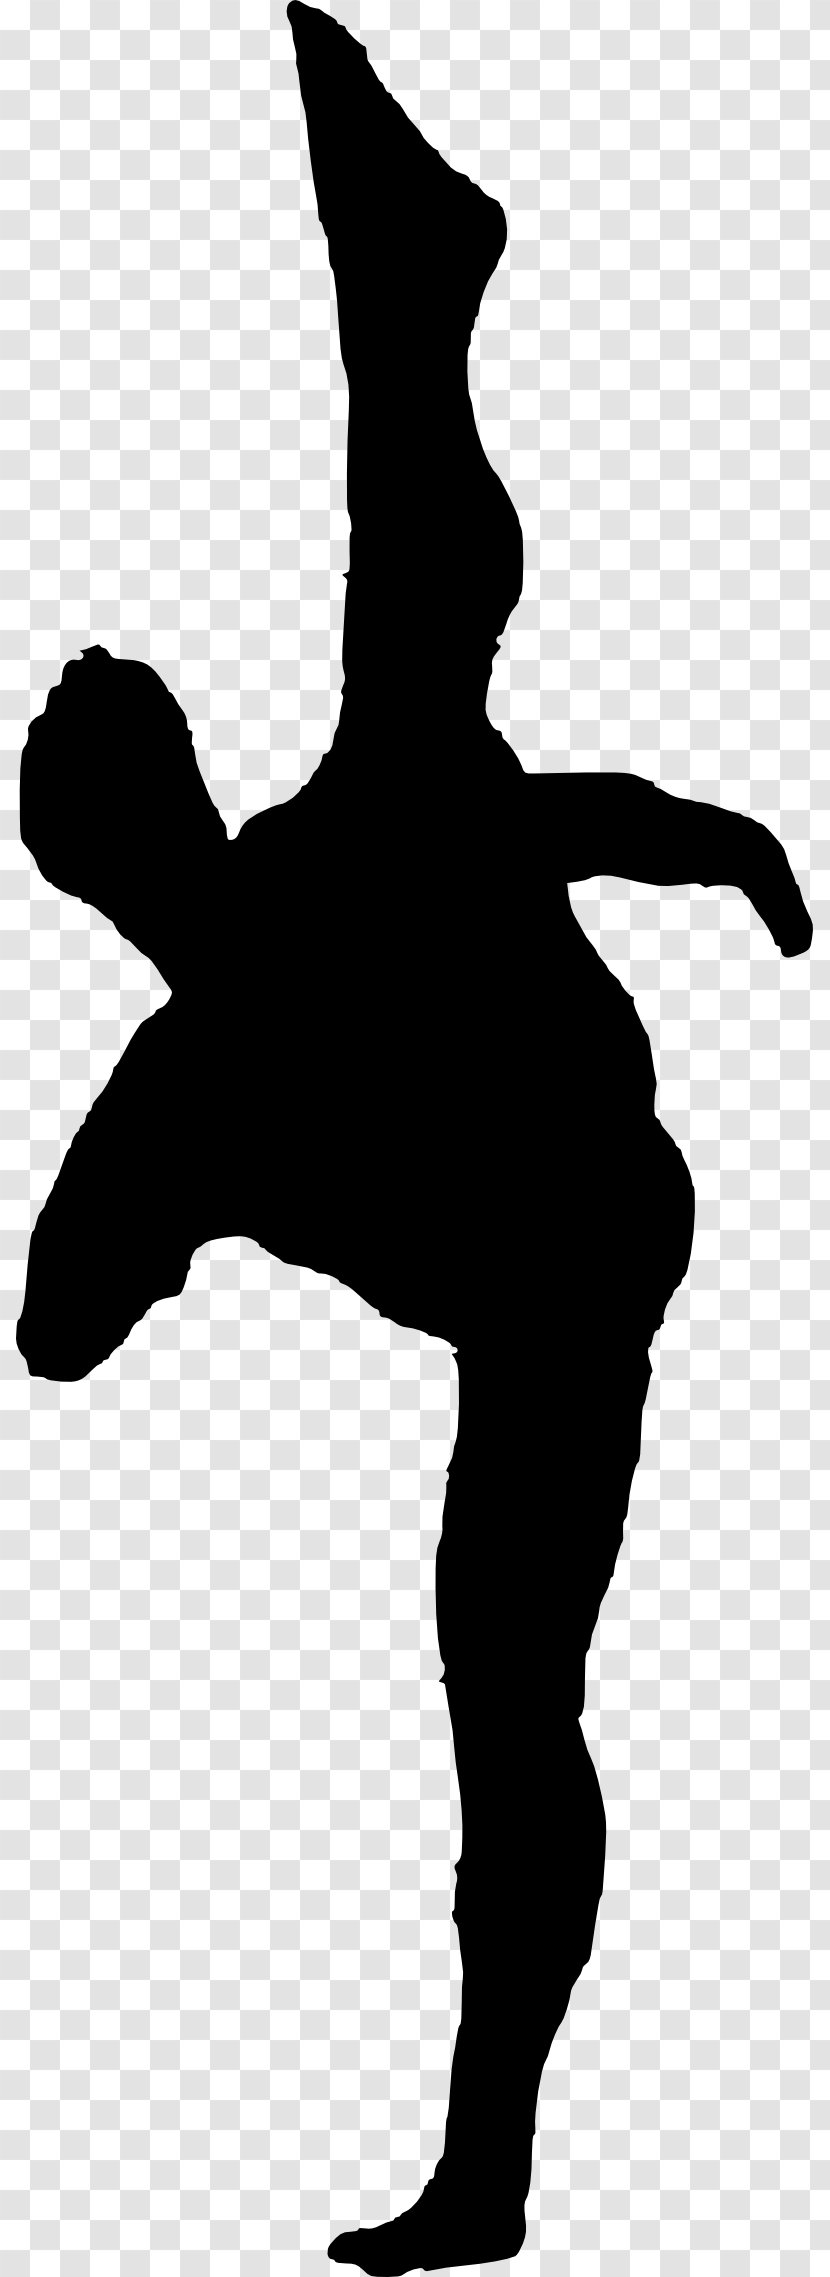 Silhouette Photography - Finger - Basketball Transparent PNG